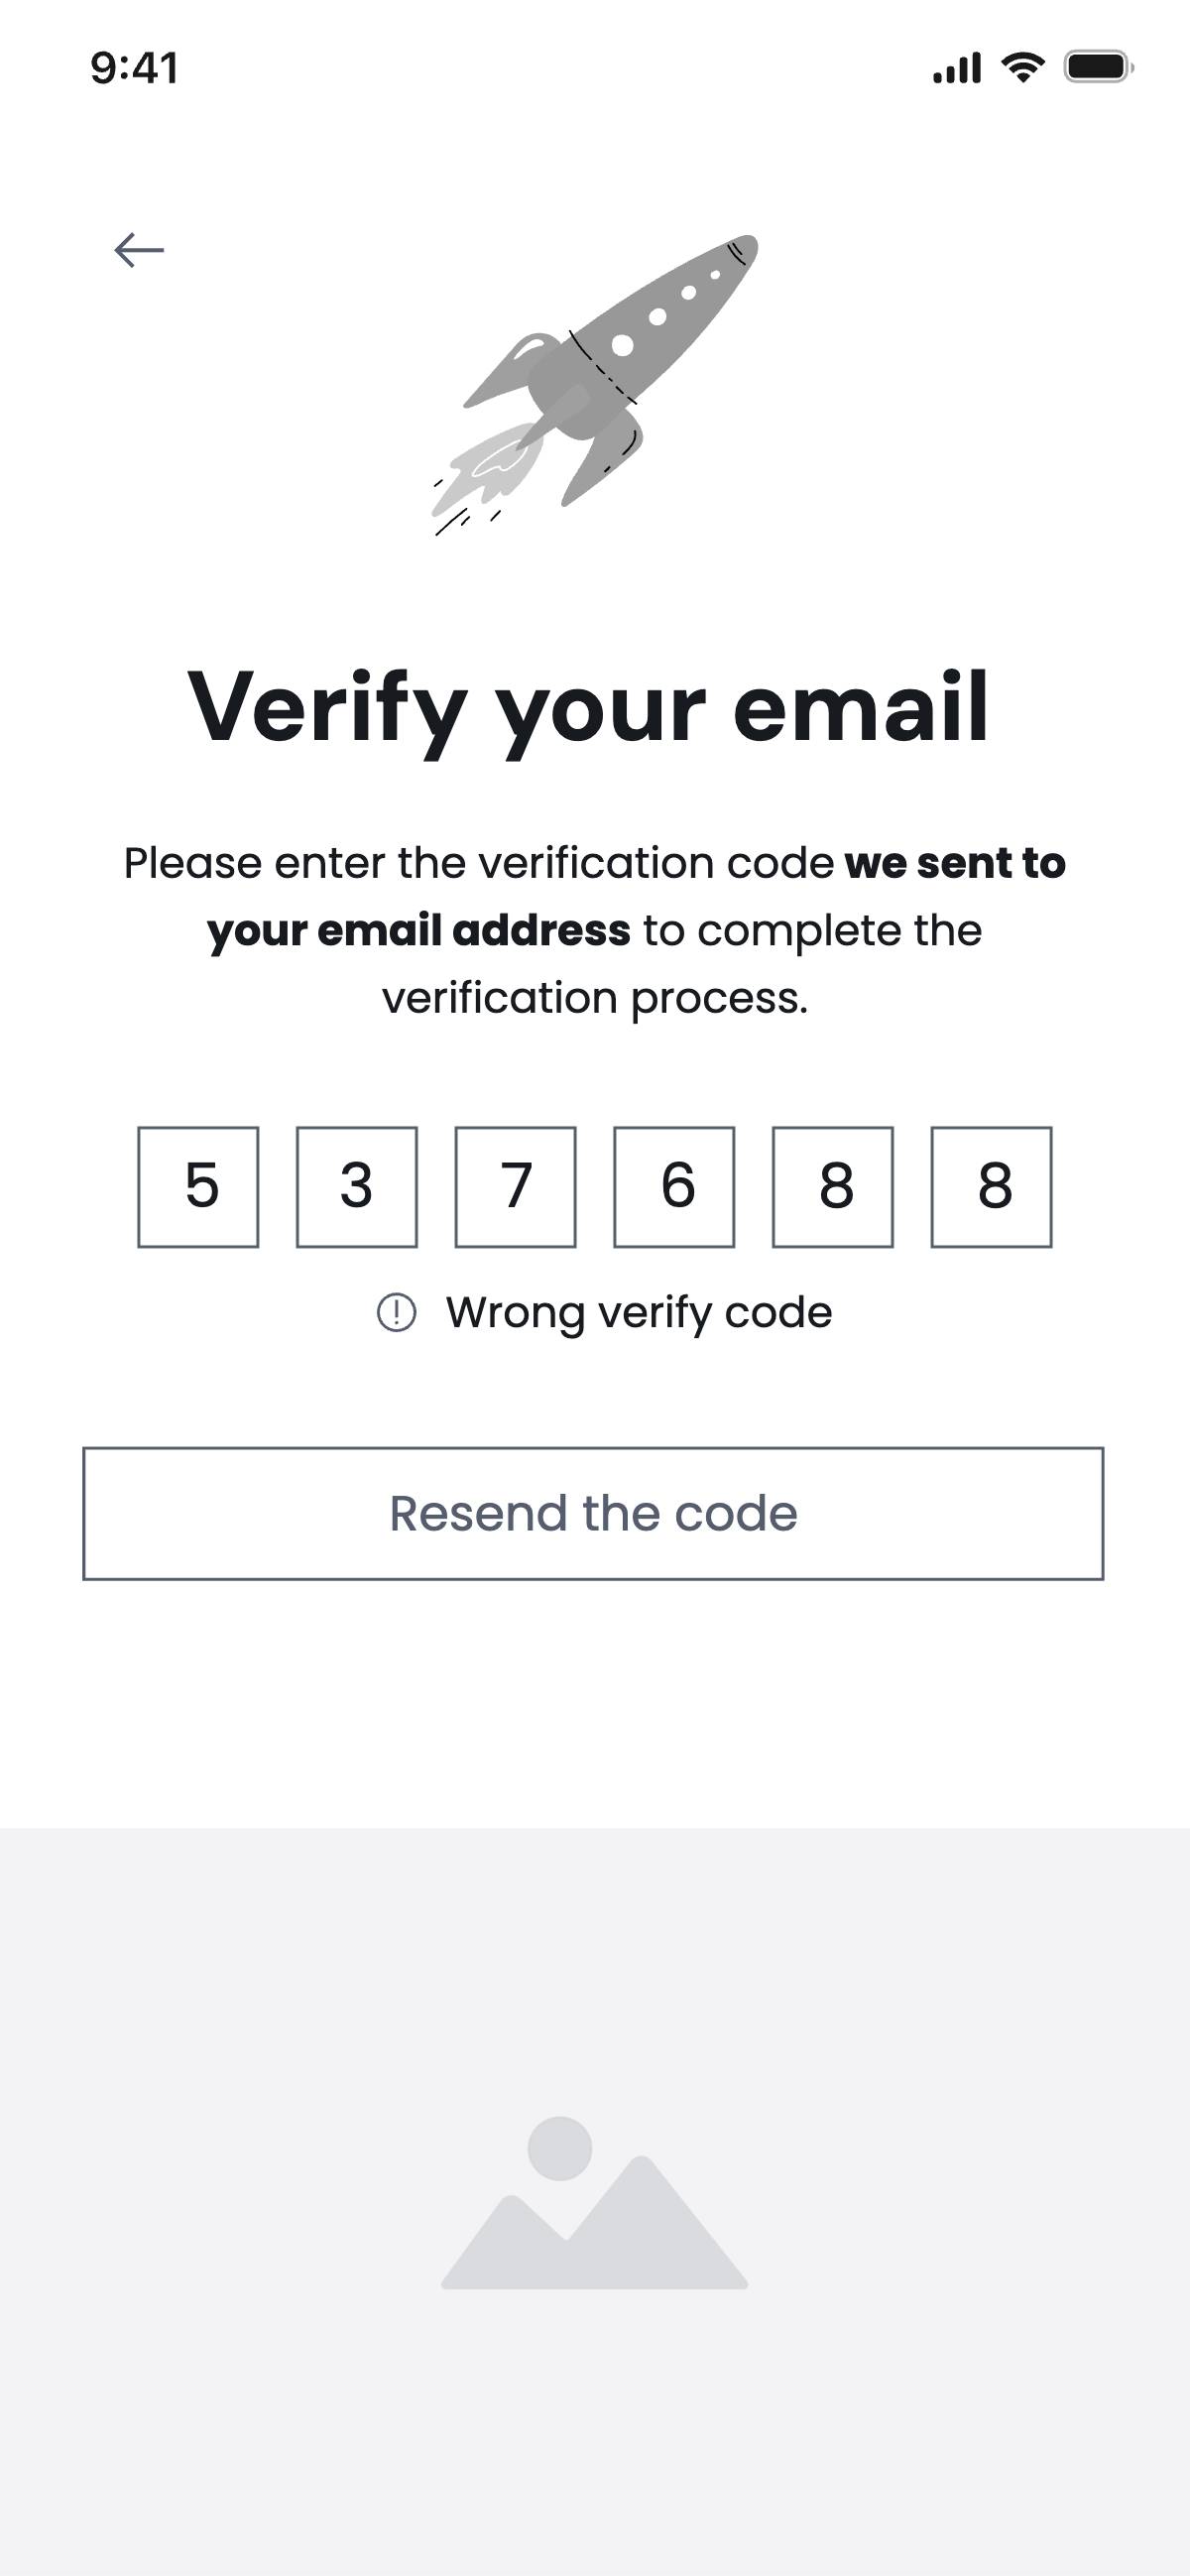 Sign up with email - Invalid code